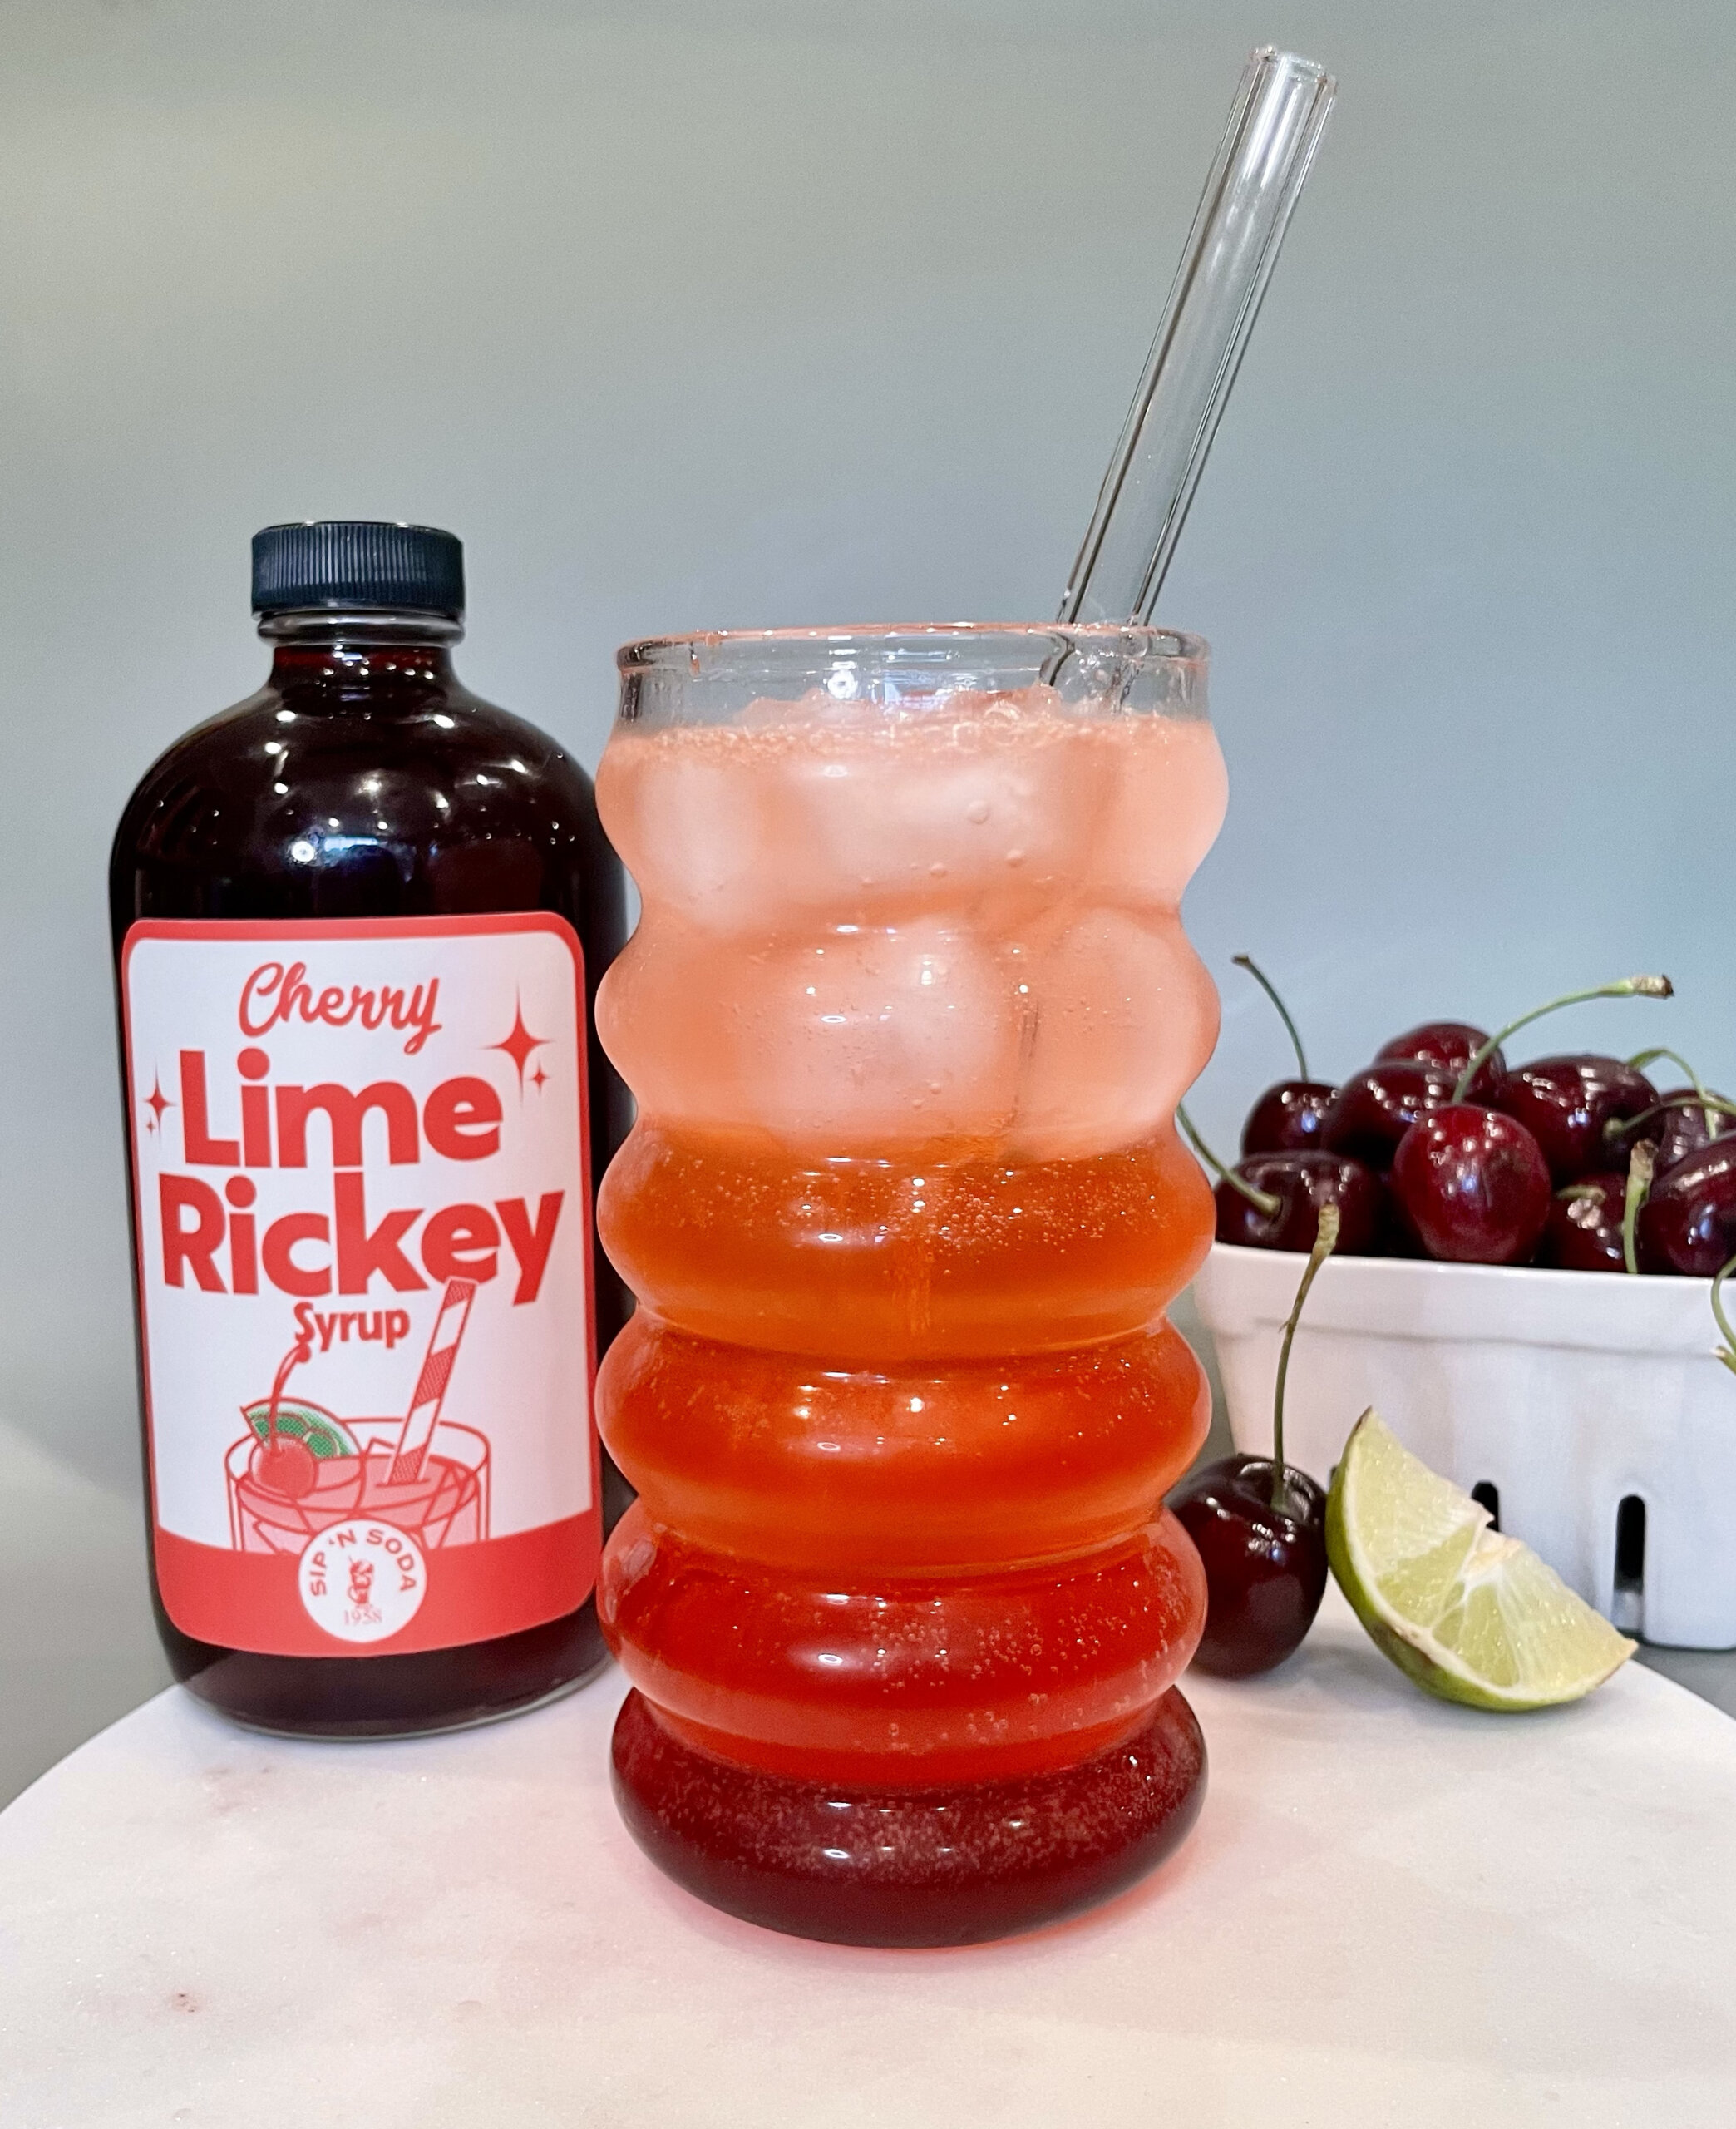 The famous Sip 'n Soda Lime Rickey and the syrup to make it at home